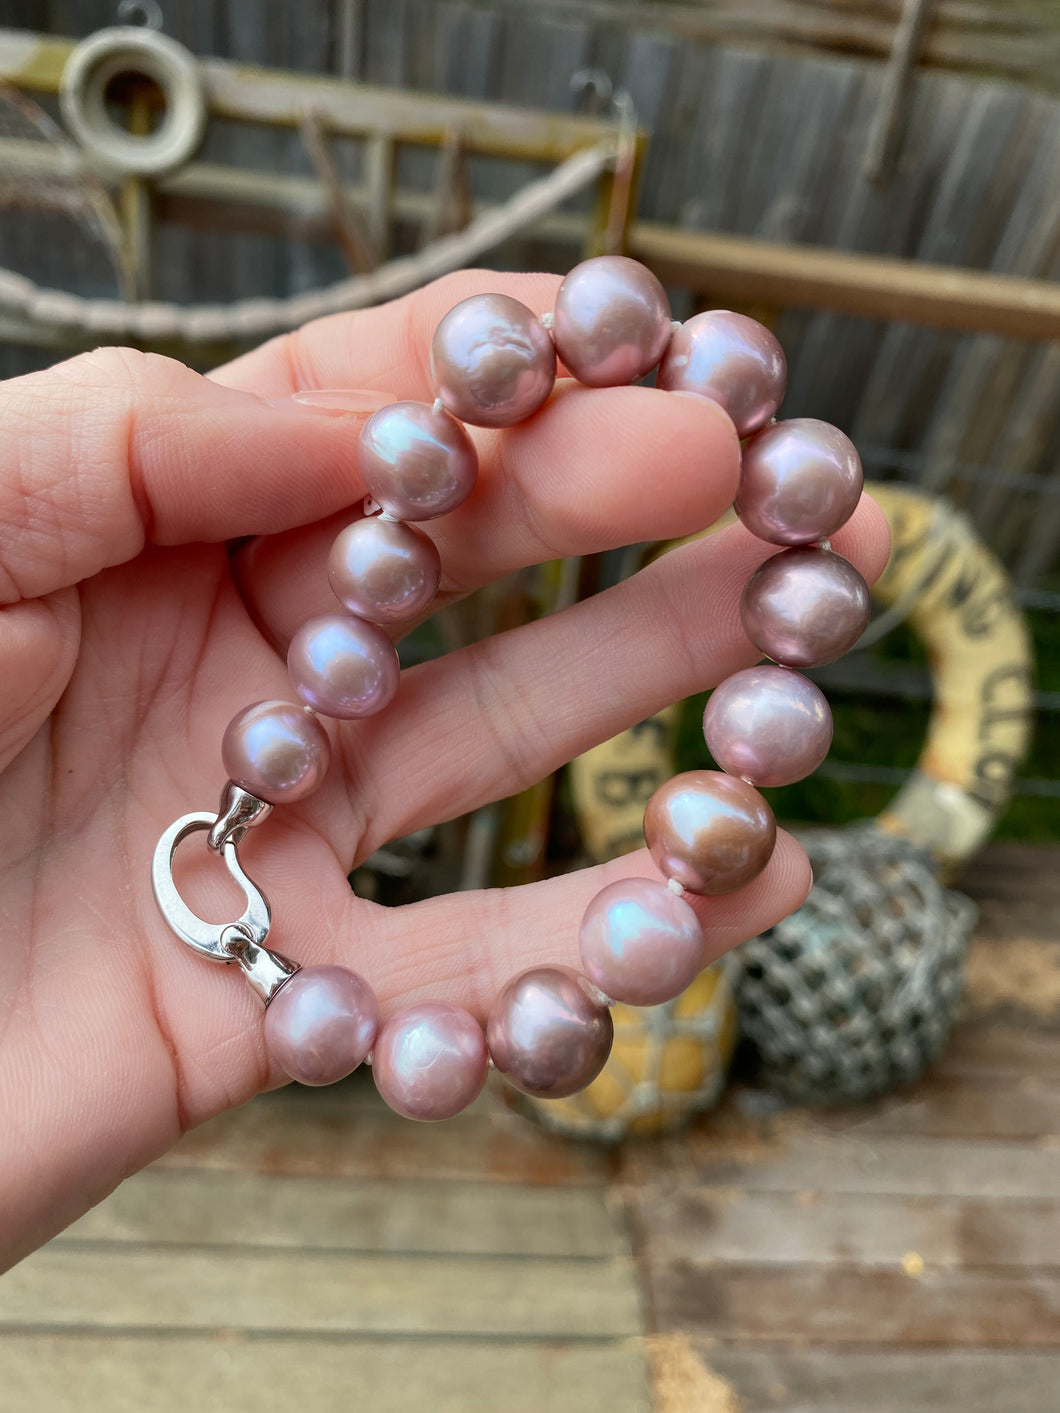 Kasumi Japanese Freshwater pearl bracelet featuring natural lavender color Round shape pearls 11 - 13mm in size  There are 15 pearls and it features  a modern 925 Sterling Silver clasp  Length 20cm